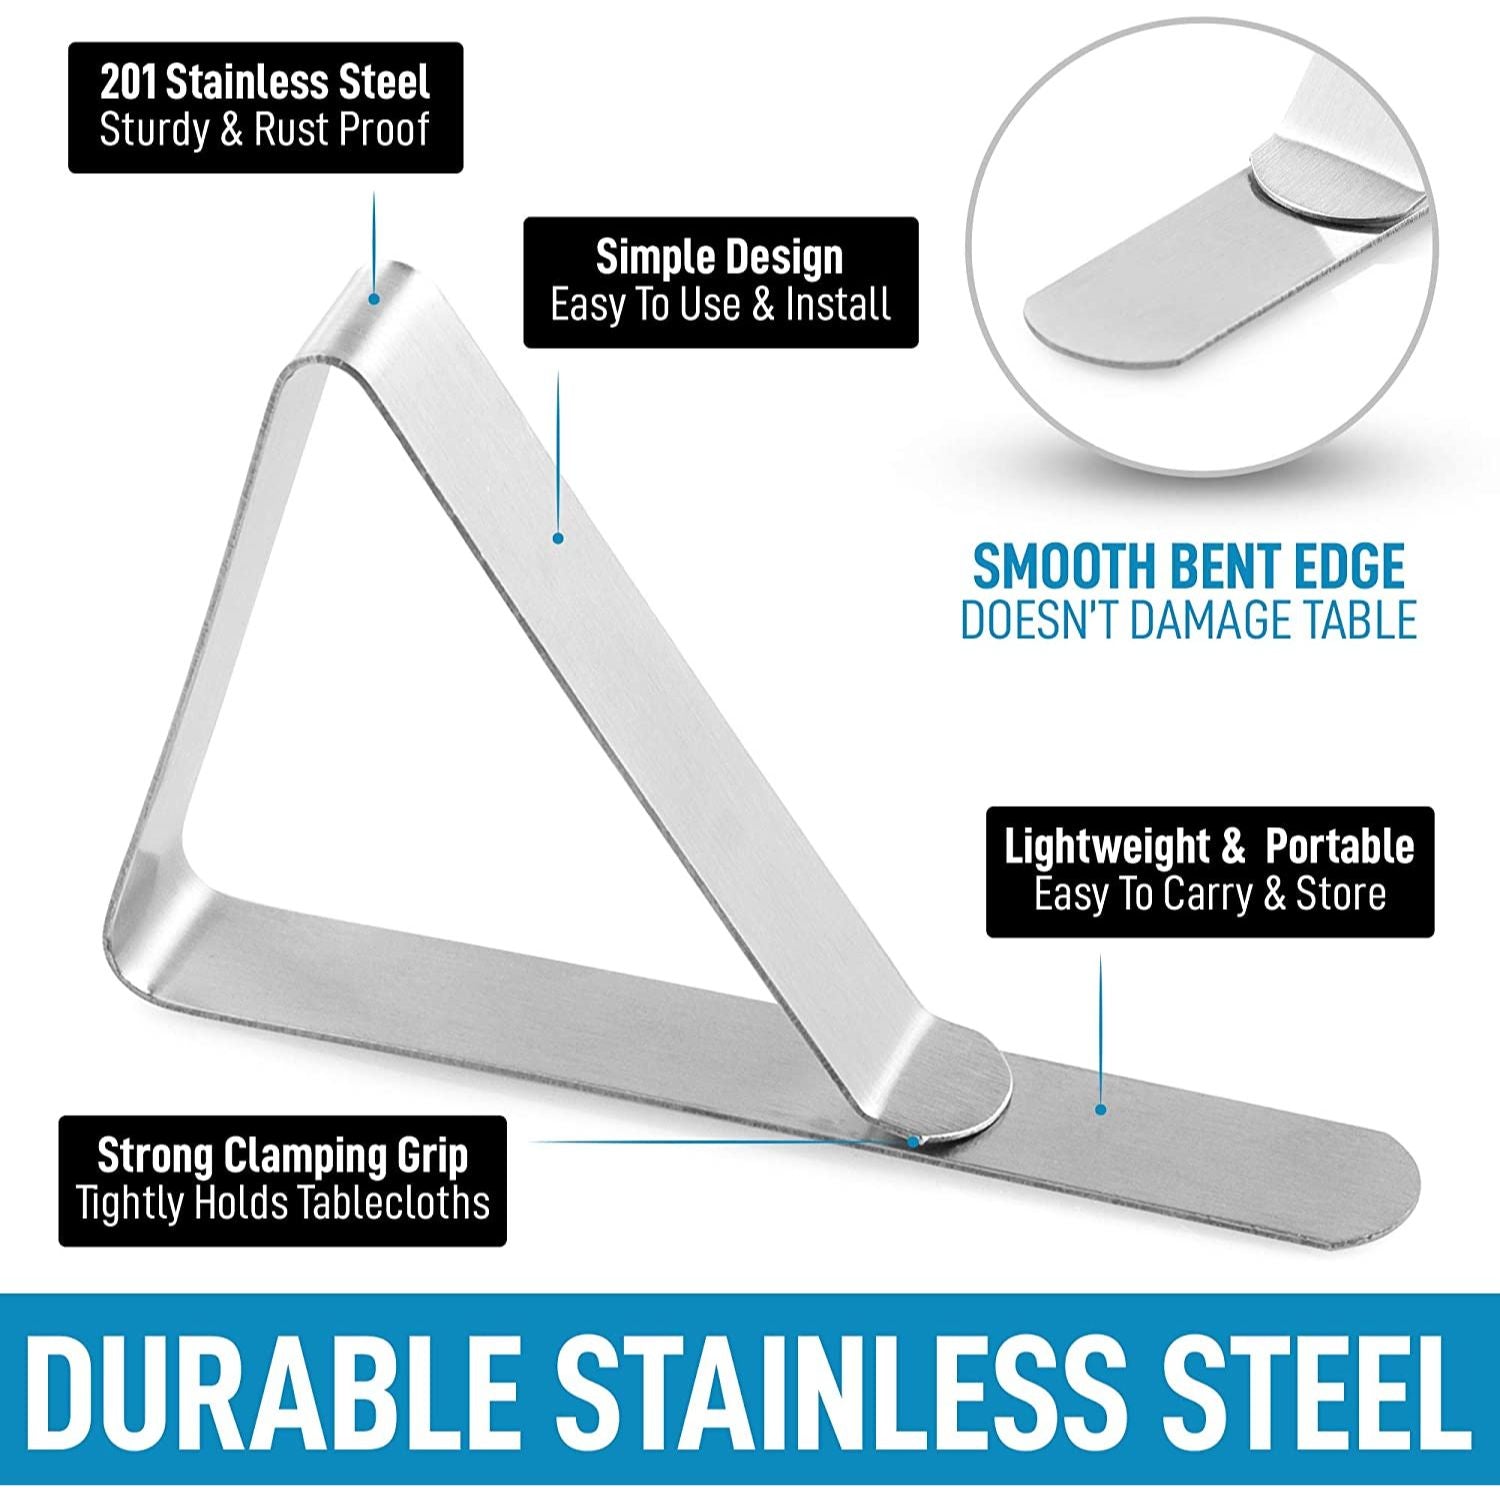 Durable stainless steel Tablecloth clips